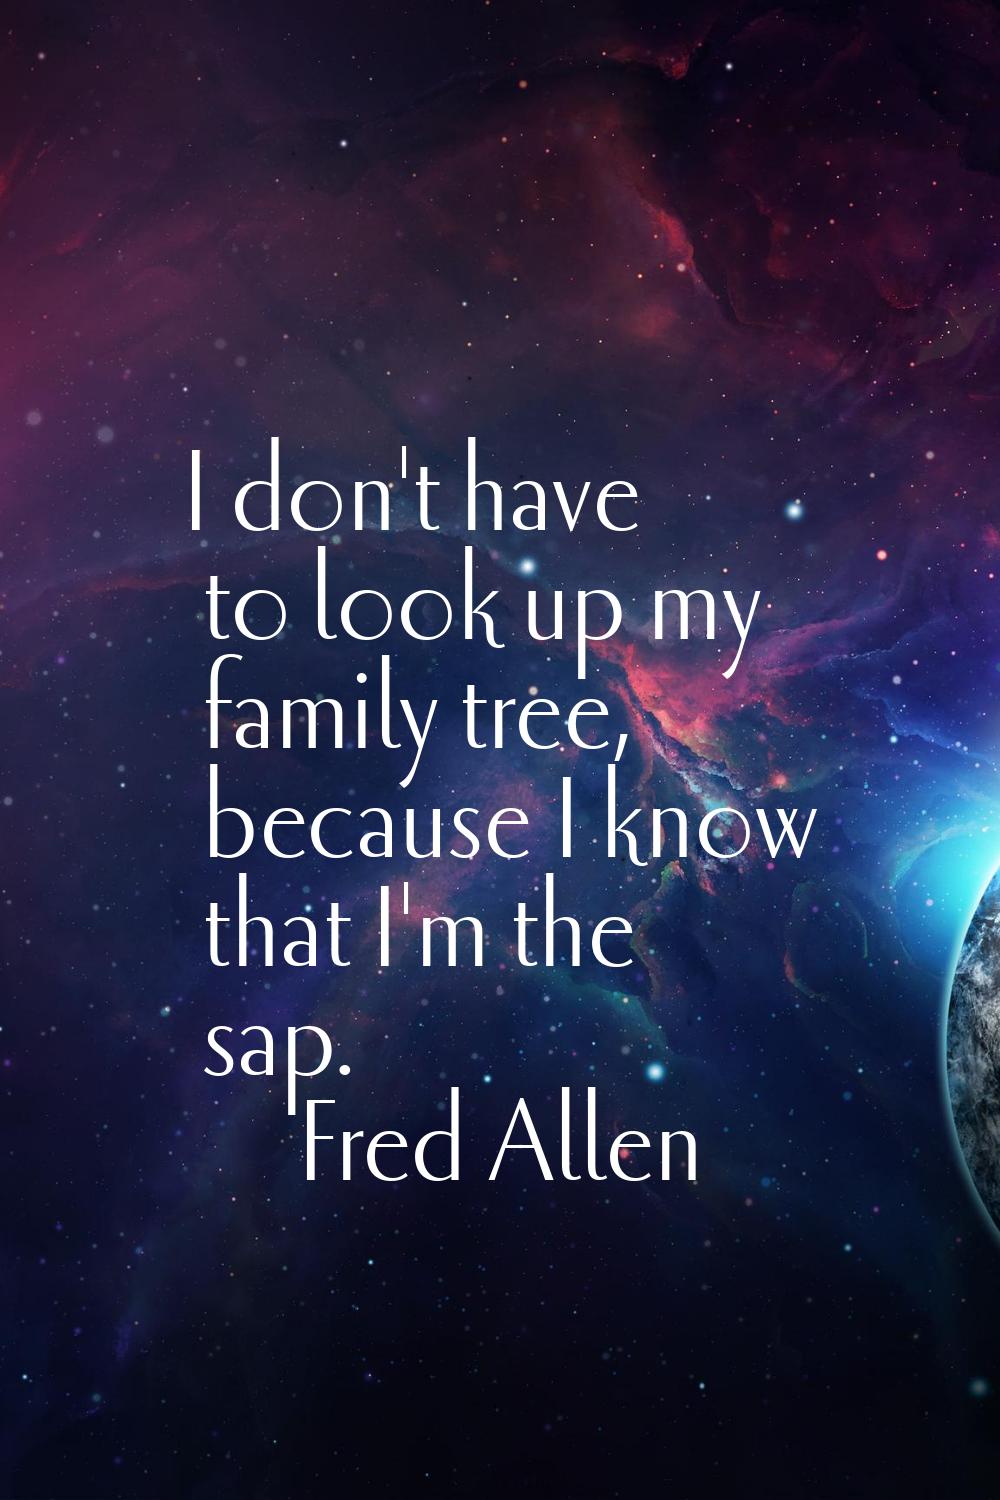 I don't have to look up my family tree, because I know that I'm the sap.